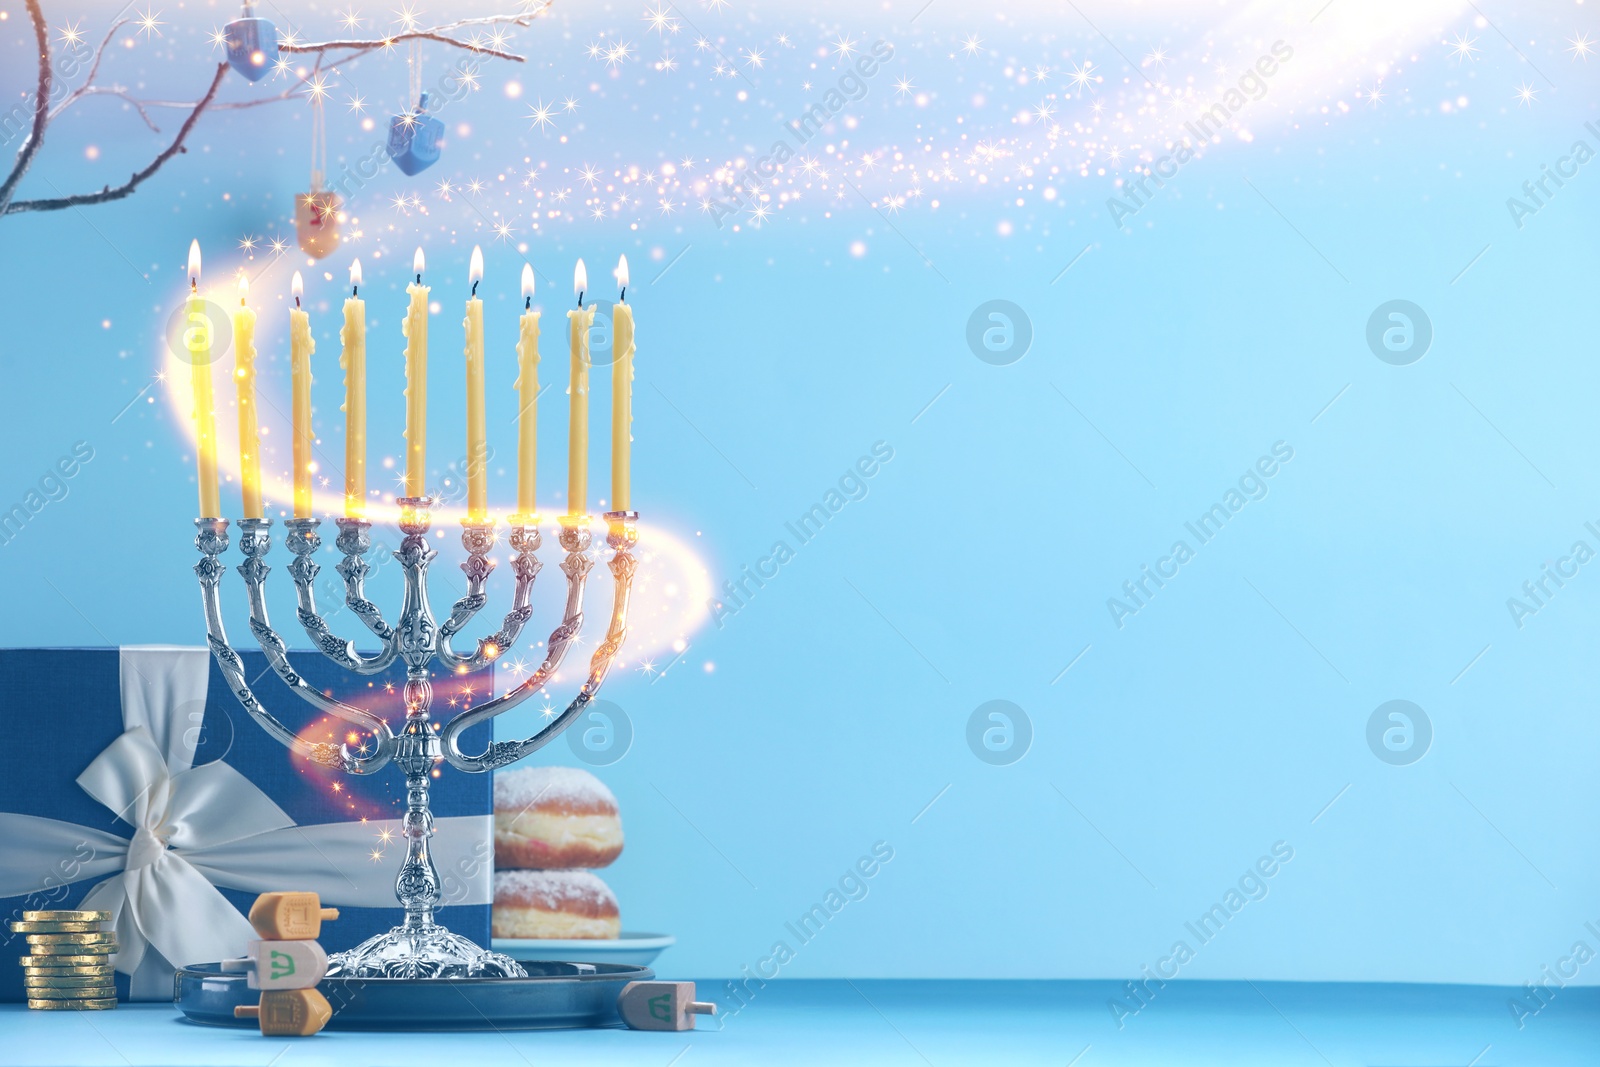 Image of Hanukkah celebration. Menorah with burning candles, dreidels, gift box and donuts on table against light blue background, space for text